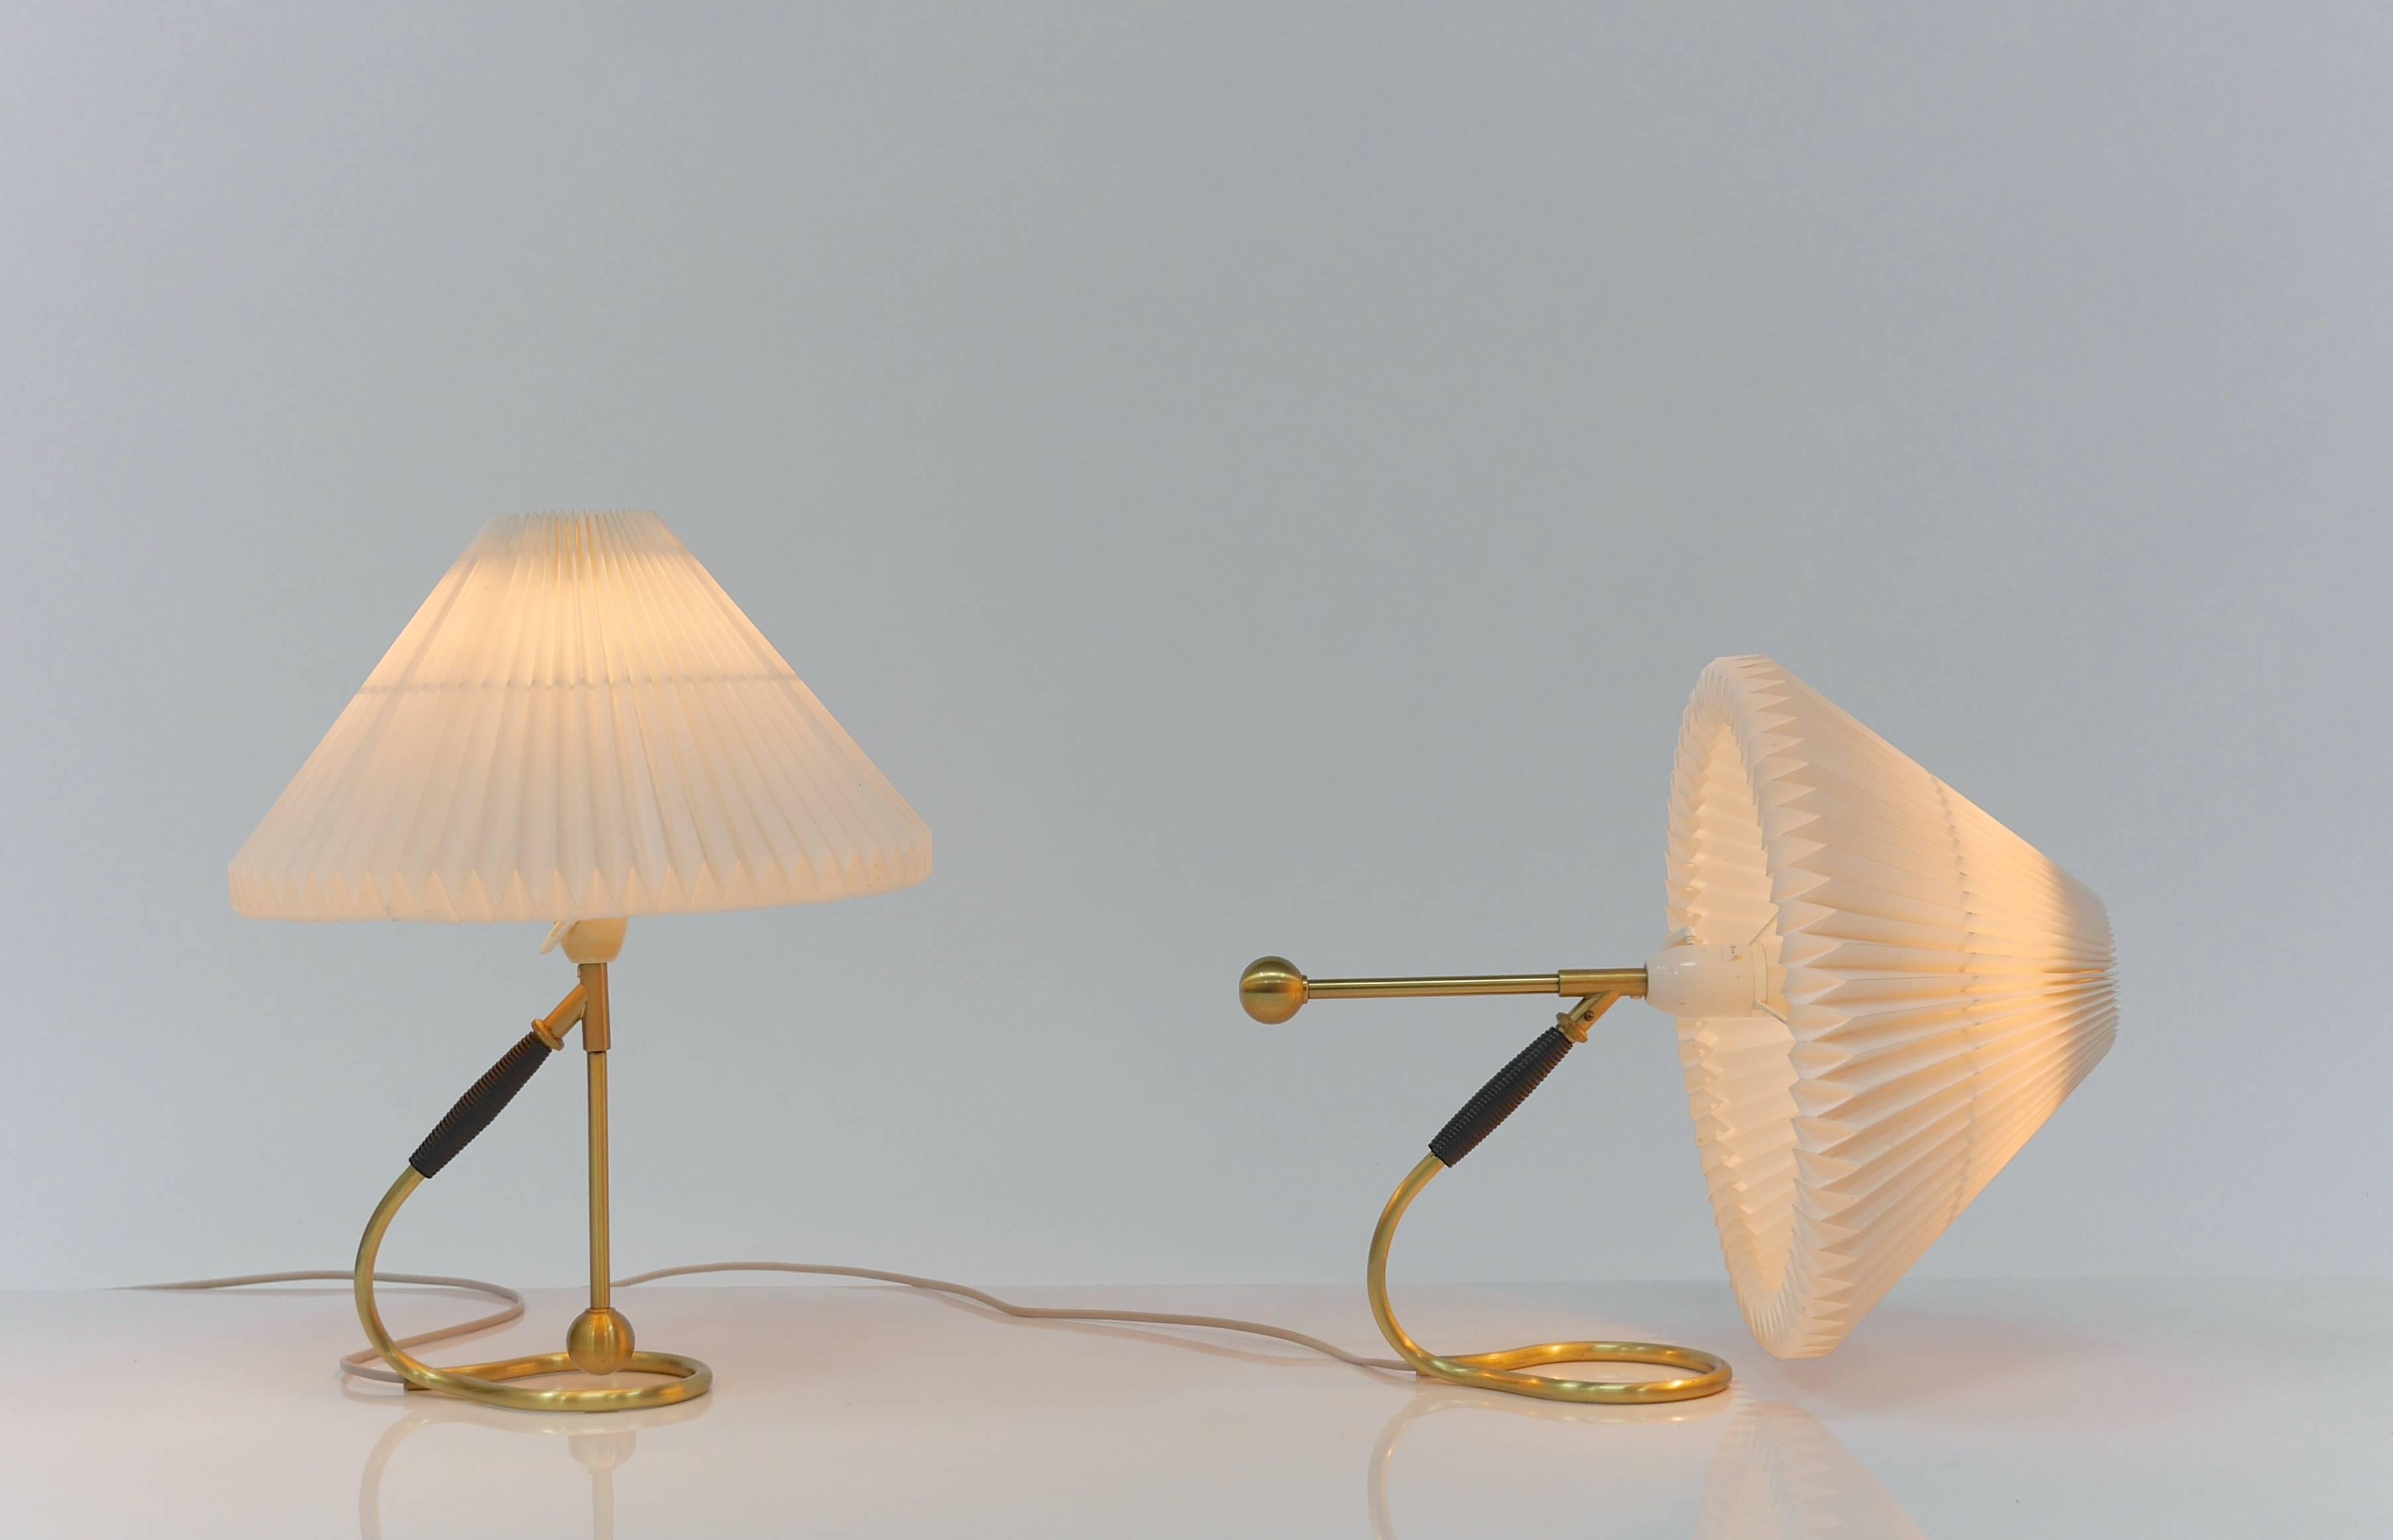 Pair of vintage Le Klint of 306 lmaps ( Kip-lampen in Danish )
This versatile lamp was designed by Kaare Klint in 1945.
With it’s tilt function the design easily converts from a table lamp to wall sconce and vice versa.